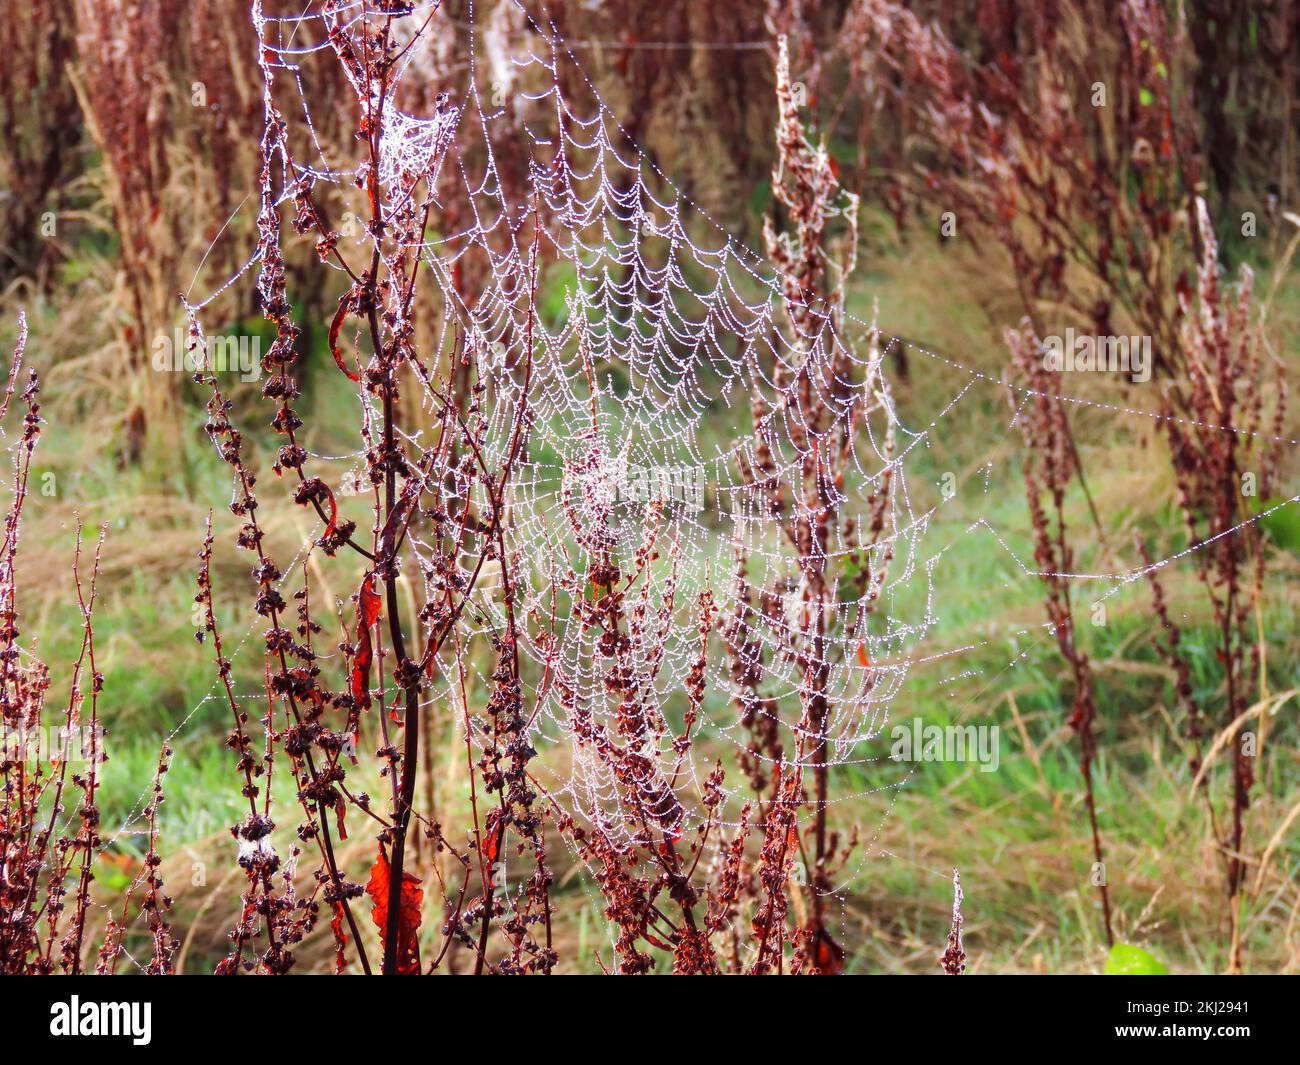 A spider web, spiderweb, spider's web, or cobweb glistening in the early morning dew with a green and red background Stock Photo